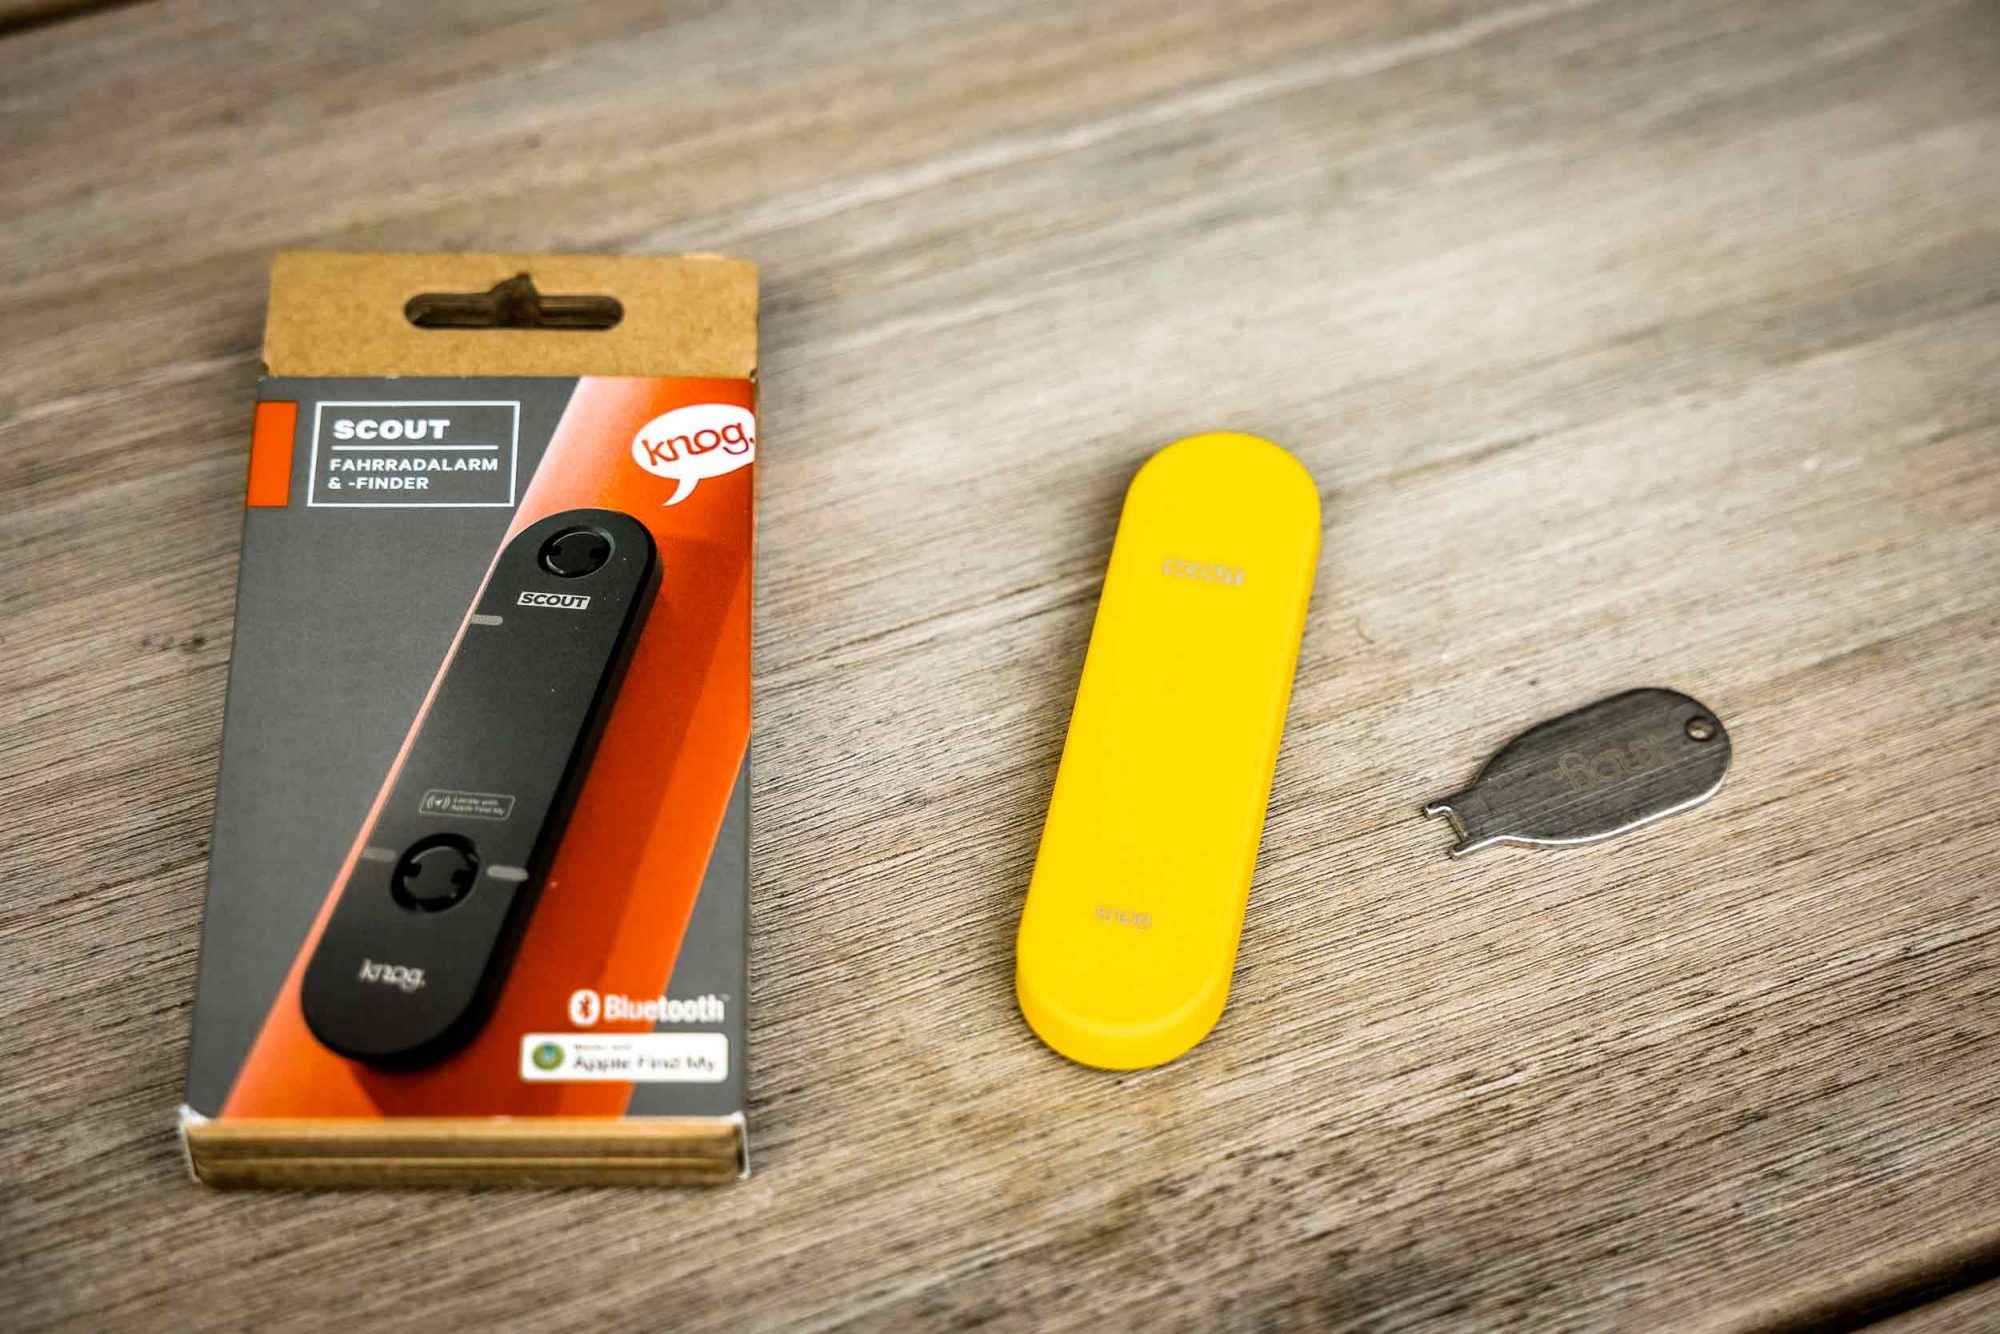 Knog scout test: this is what's inside the little cardboard box (completely without plastic). The gps bike tracker, a yellow neoprene cover and the small „screwdriver".